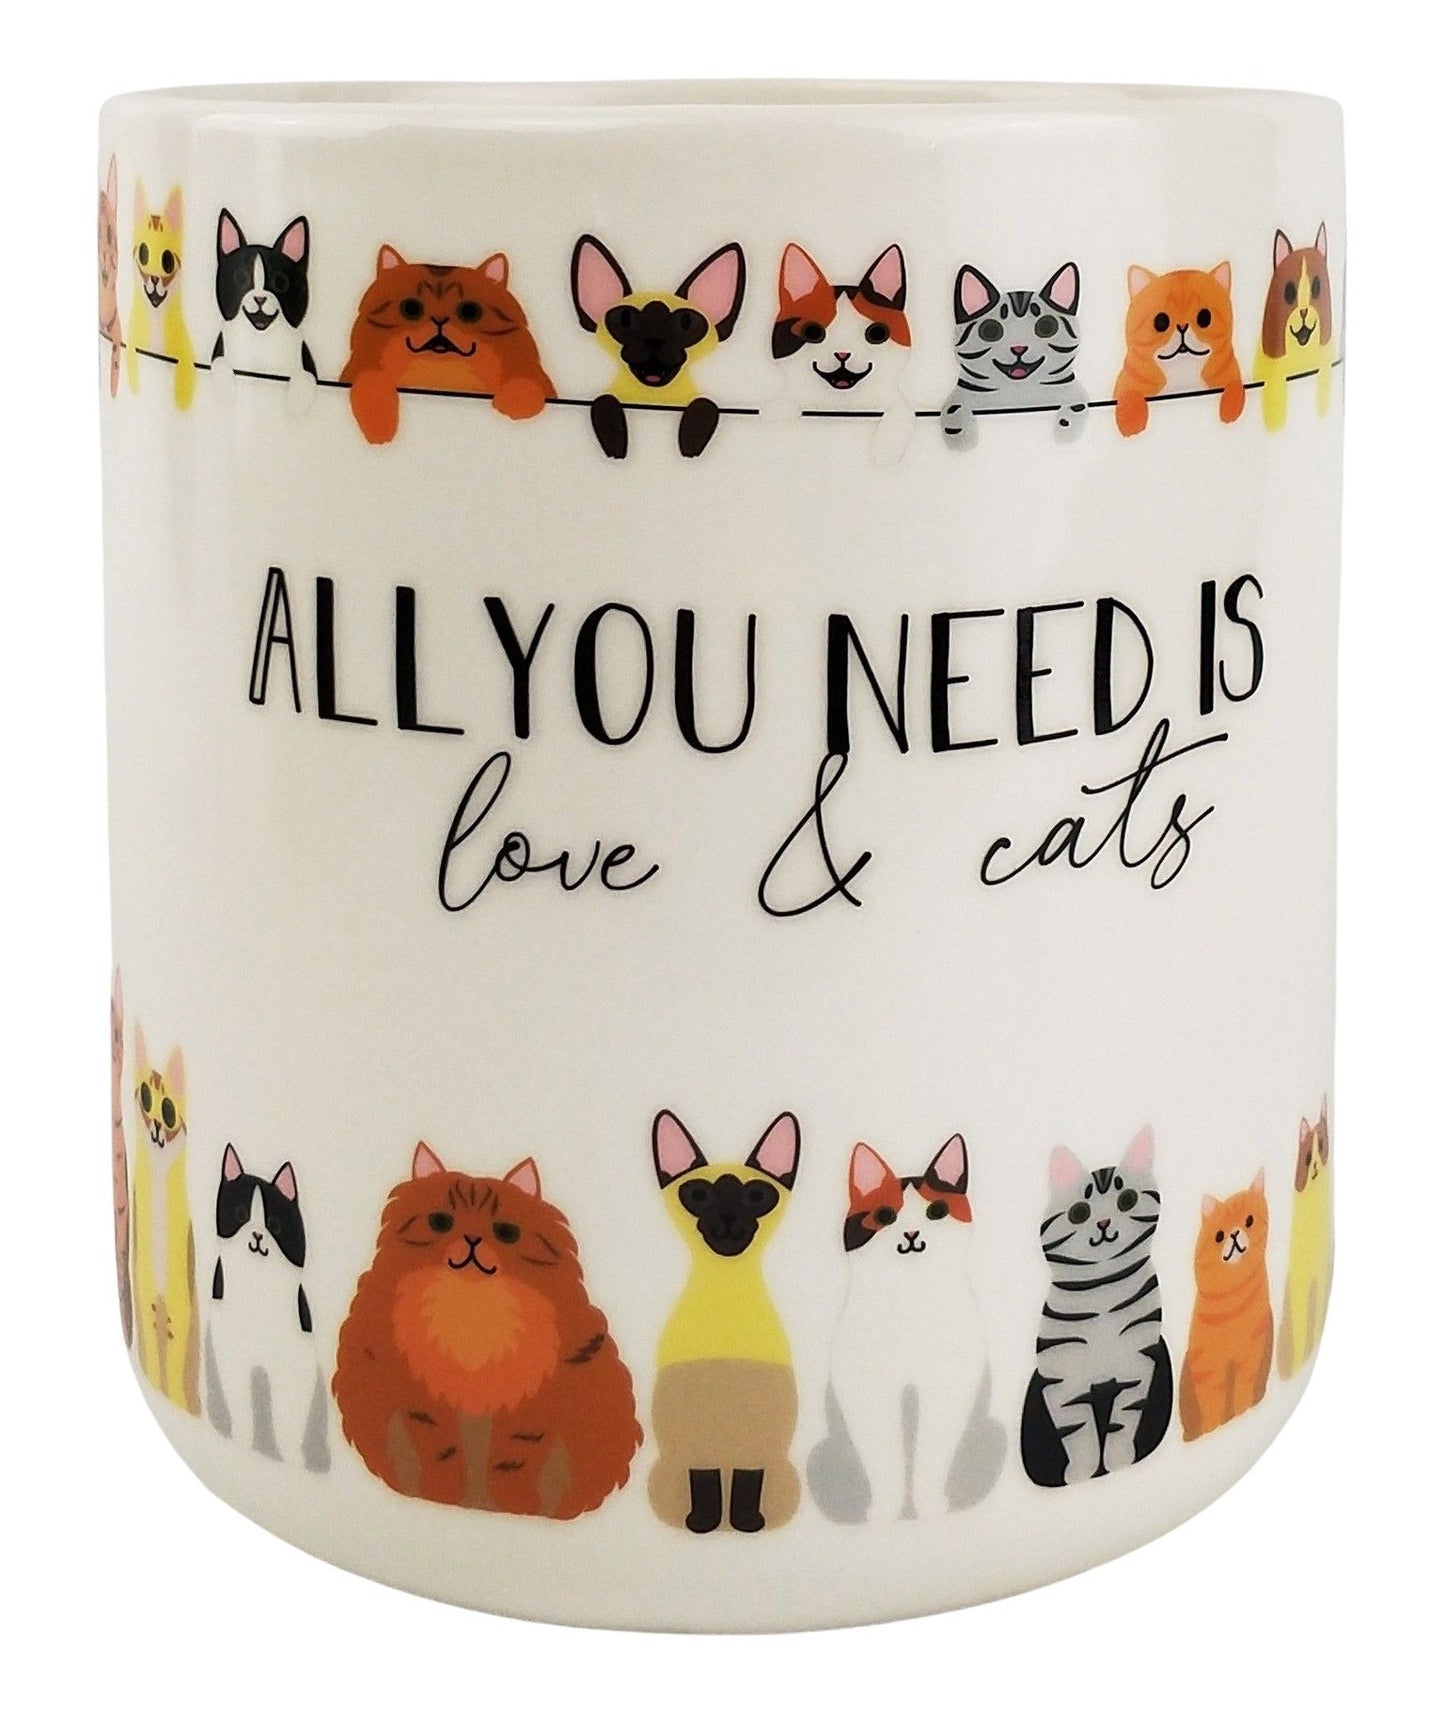 Quirky Cat Planter- All you need is love and cats